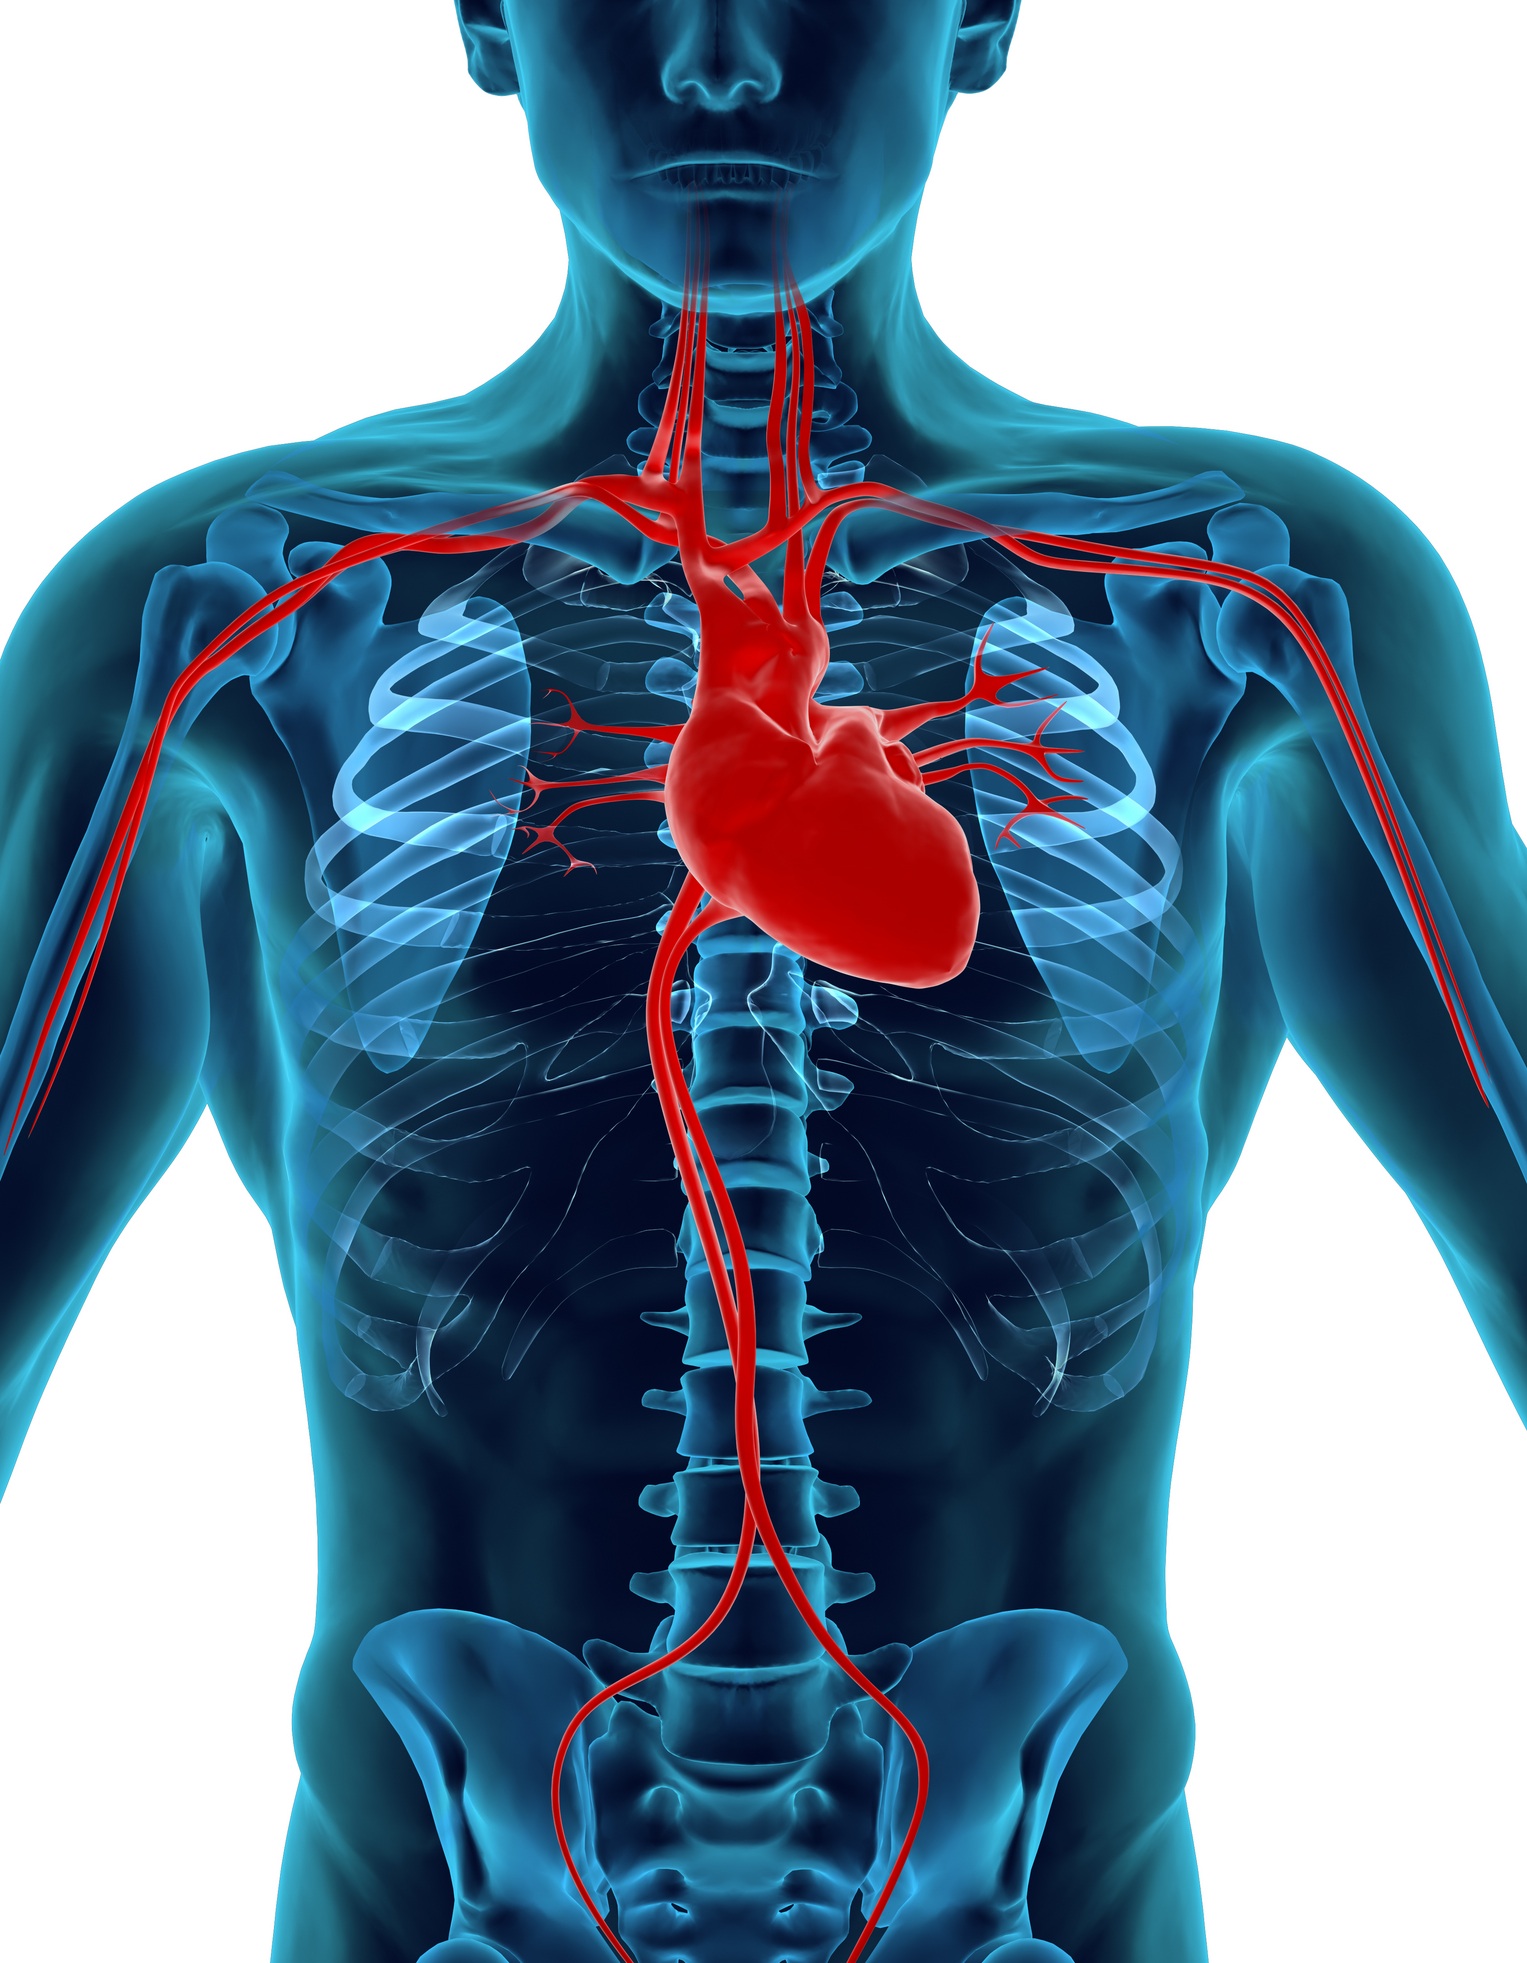 Free Human Heart Images, Download Free Clip Art, Free Clip ...